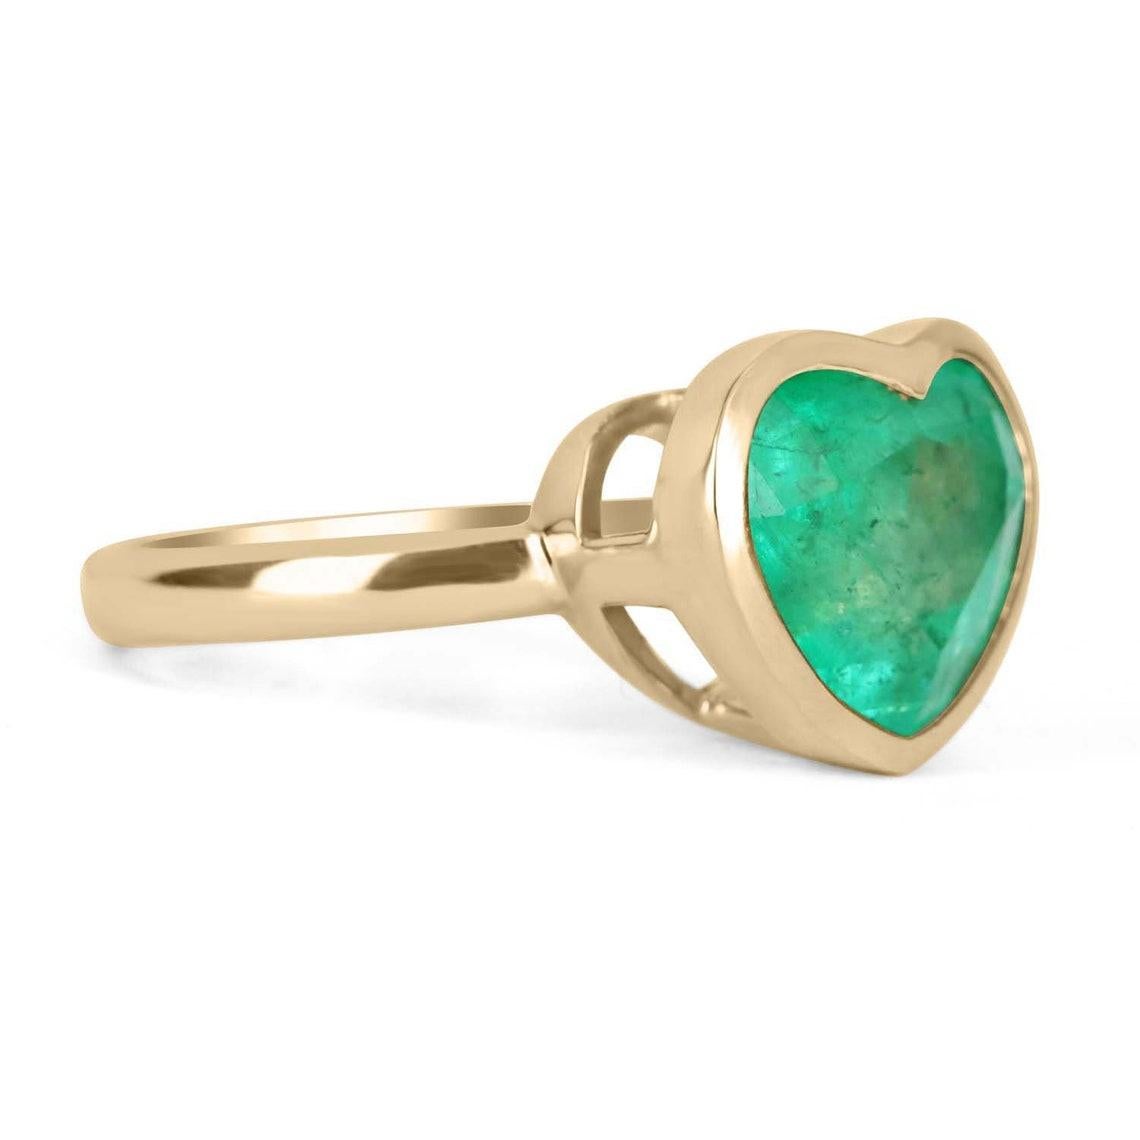 This ring is not for the faint of heart! Displayed is a VERY large Colombian emerald heart solitaire ring in 14K gold. This gorgeous solitaire ring is bezel set in yellow gold and carries a full 6.10-carat emerald that will have you gazing at its